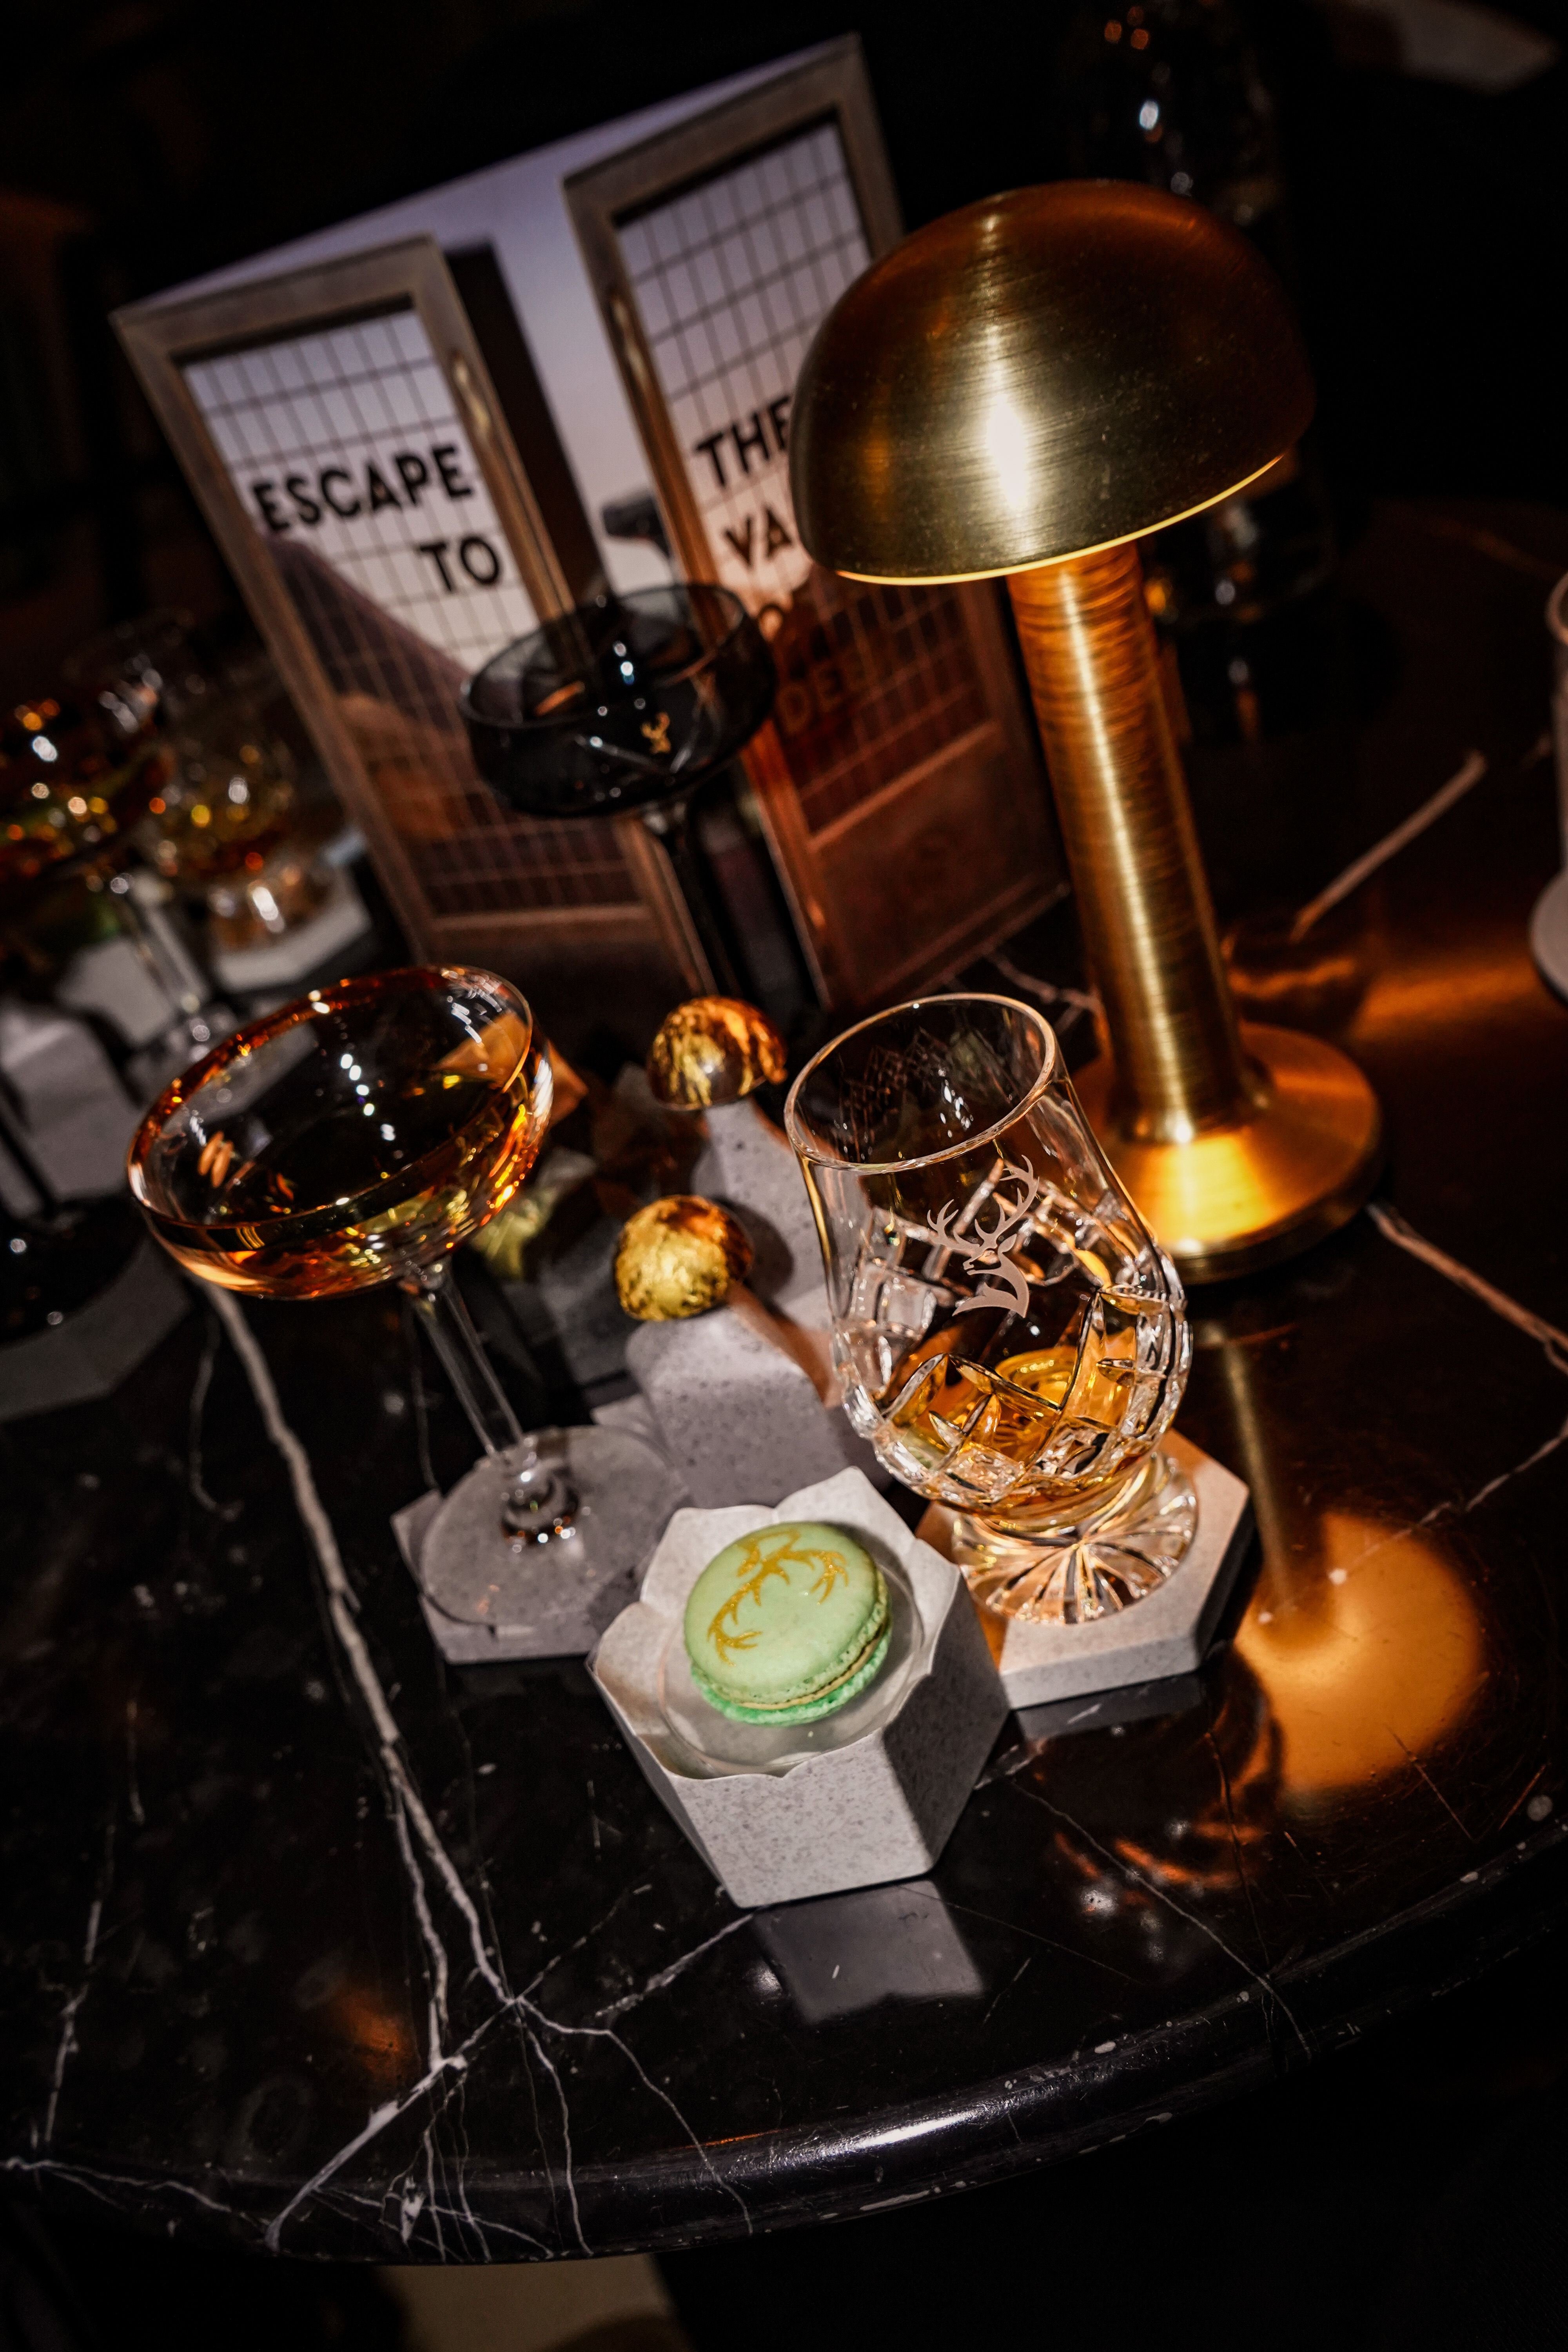 Sam Gray Style Escape to the Valley of the Deer with Glenfiddich Whisky and Hotel Cafe Royal London